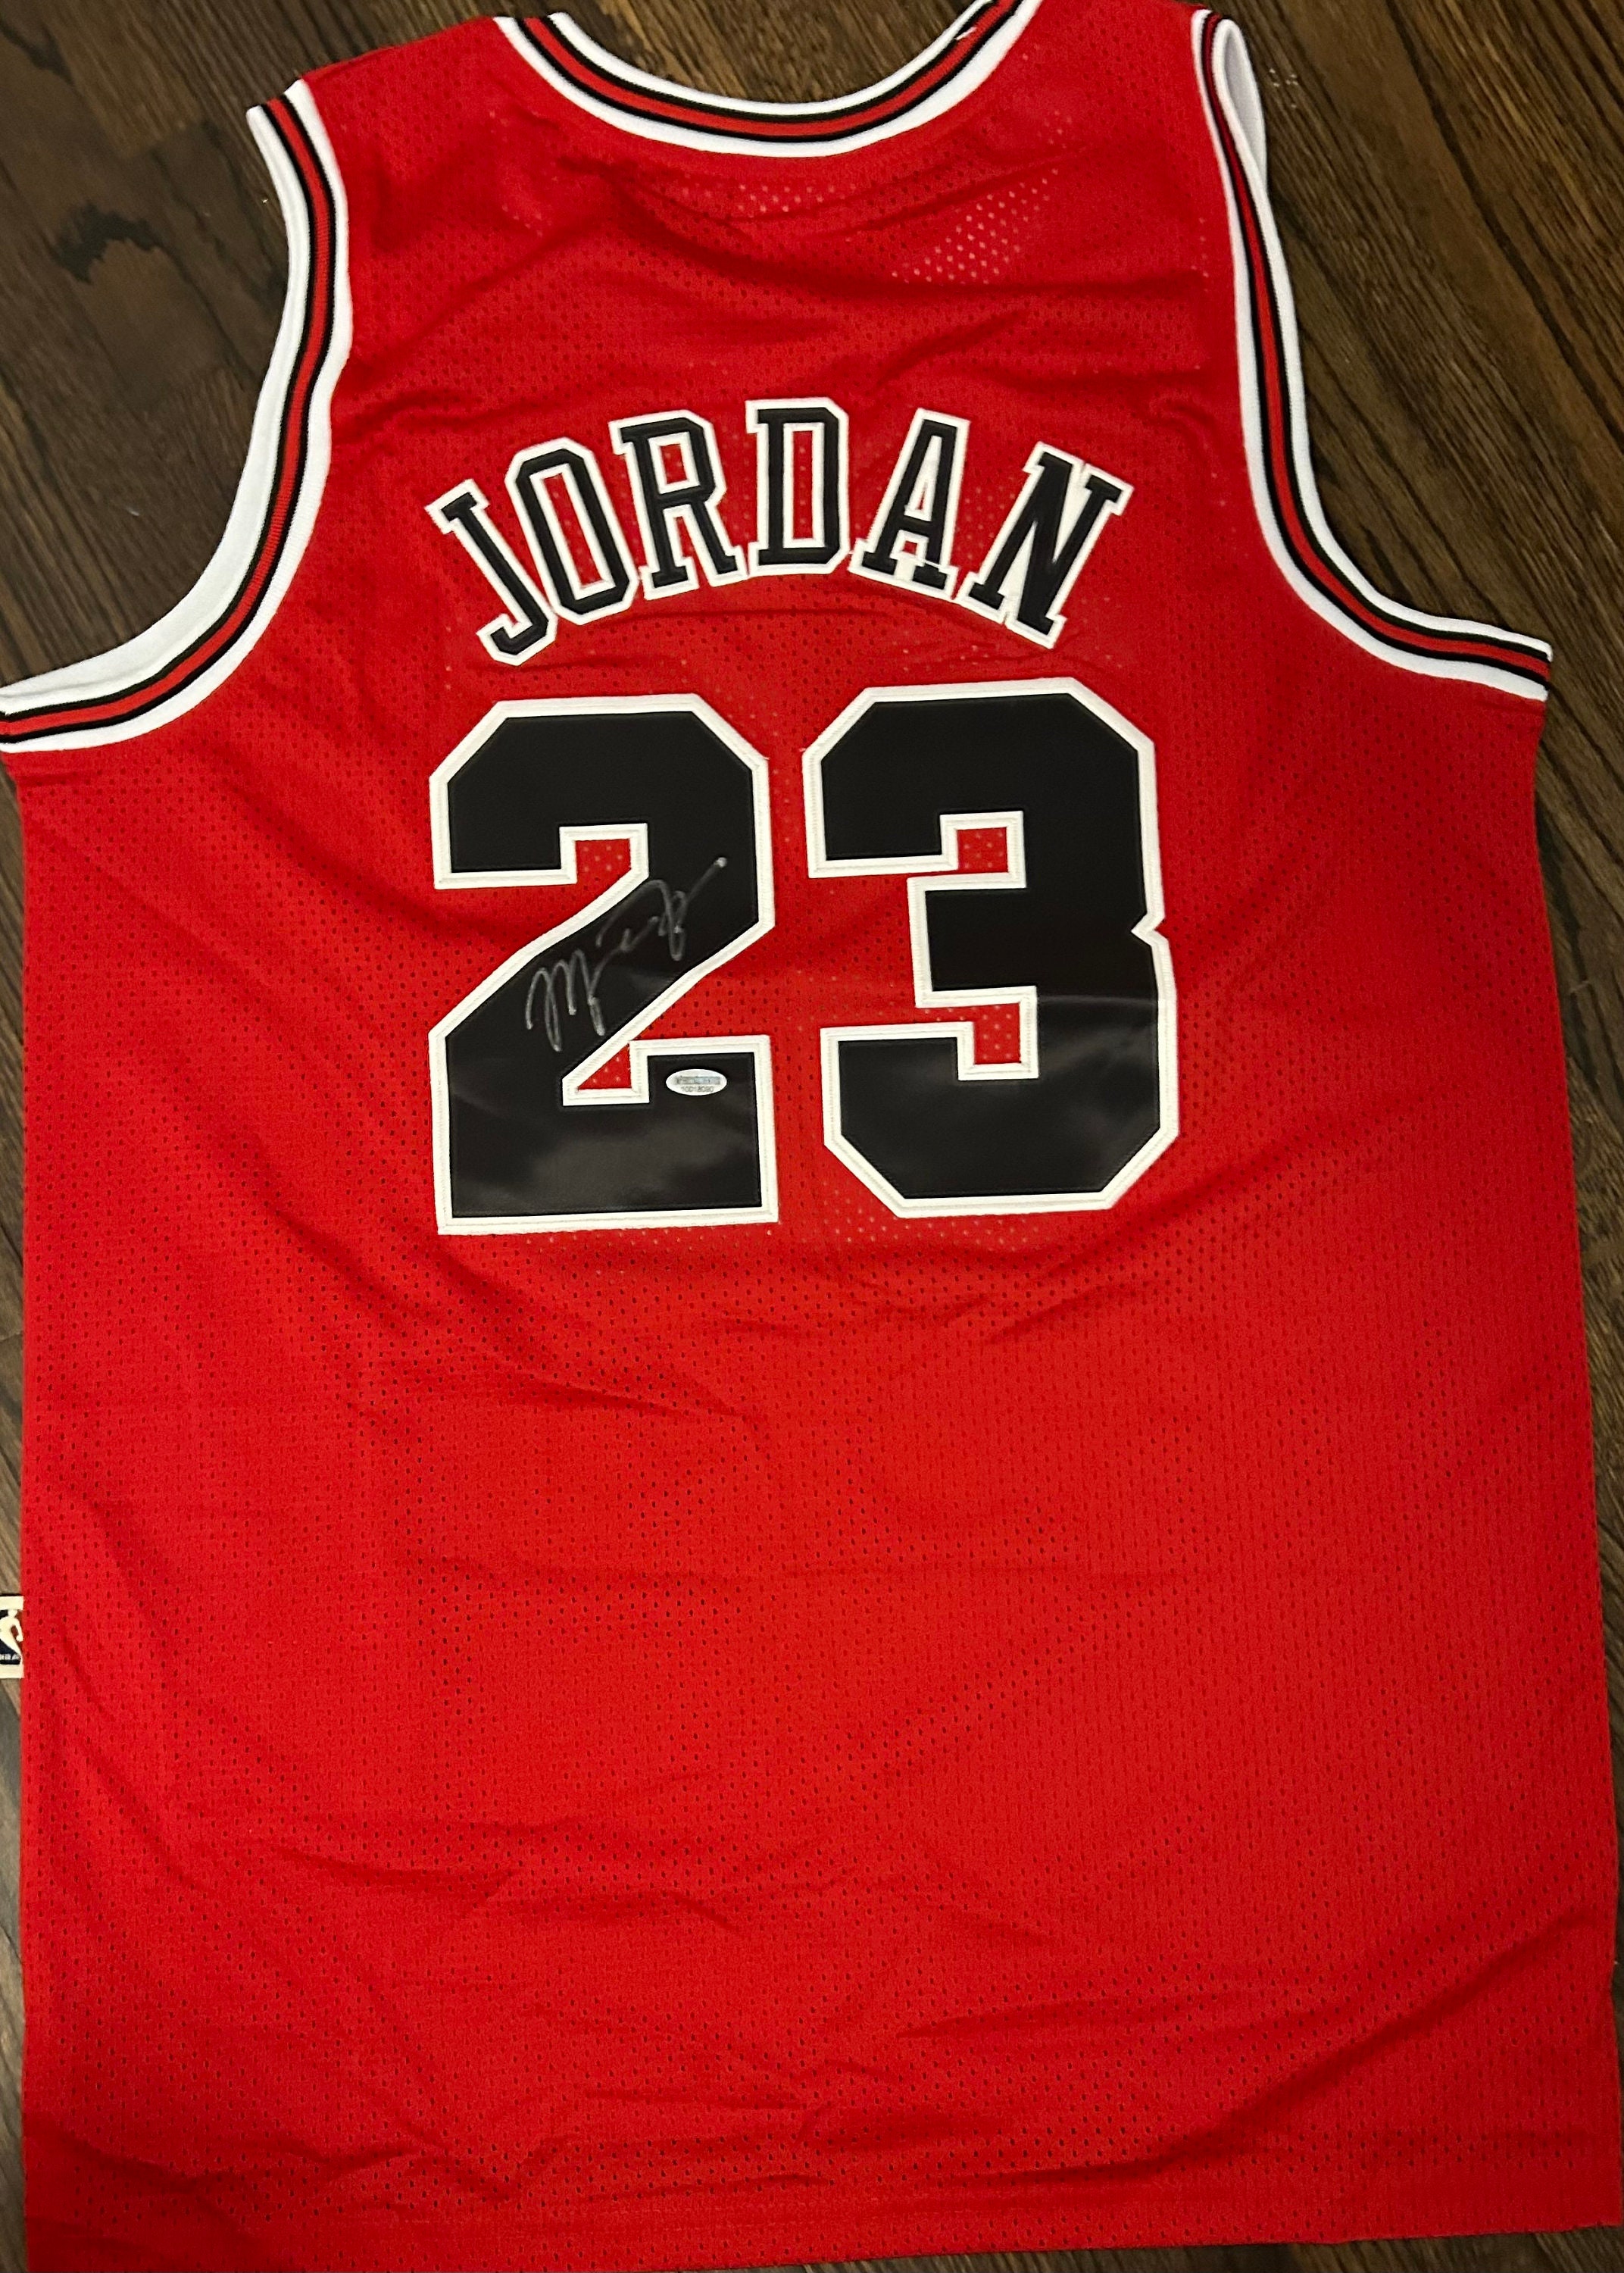 23 Chicago Goat Jordan Unisex Shirt Basketball Vintage Retro Chi-Town Style  Classic Adult & Youth Fit 